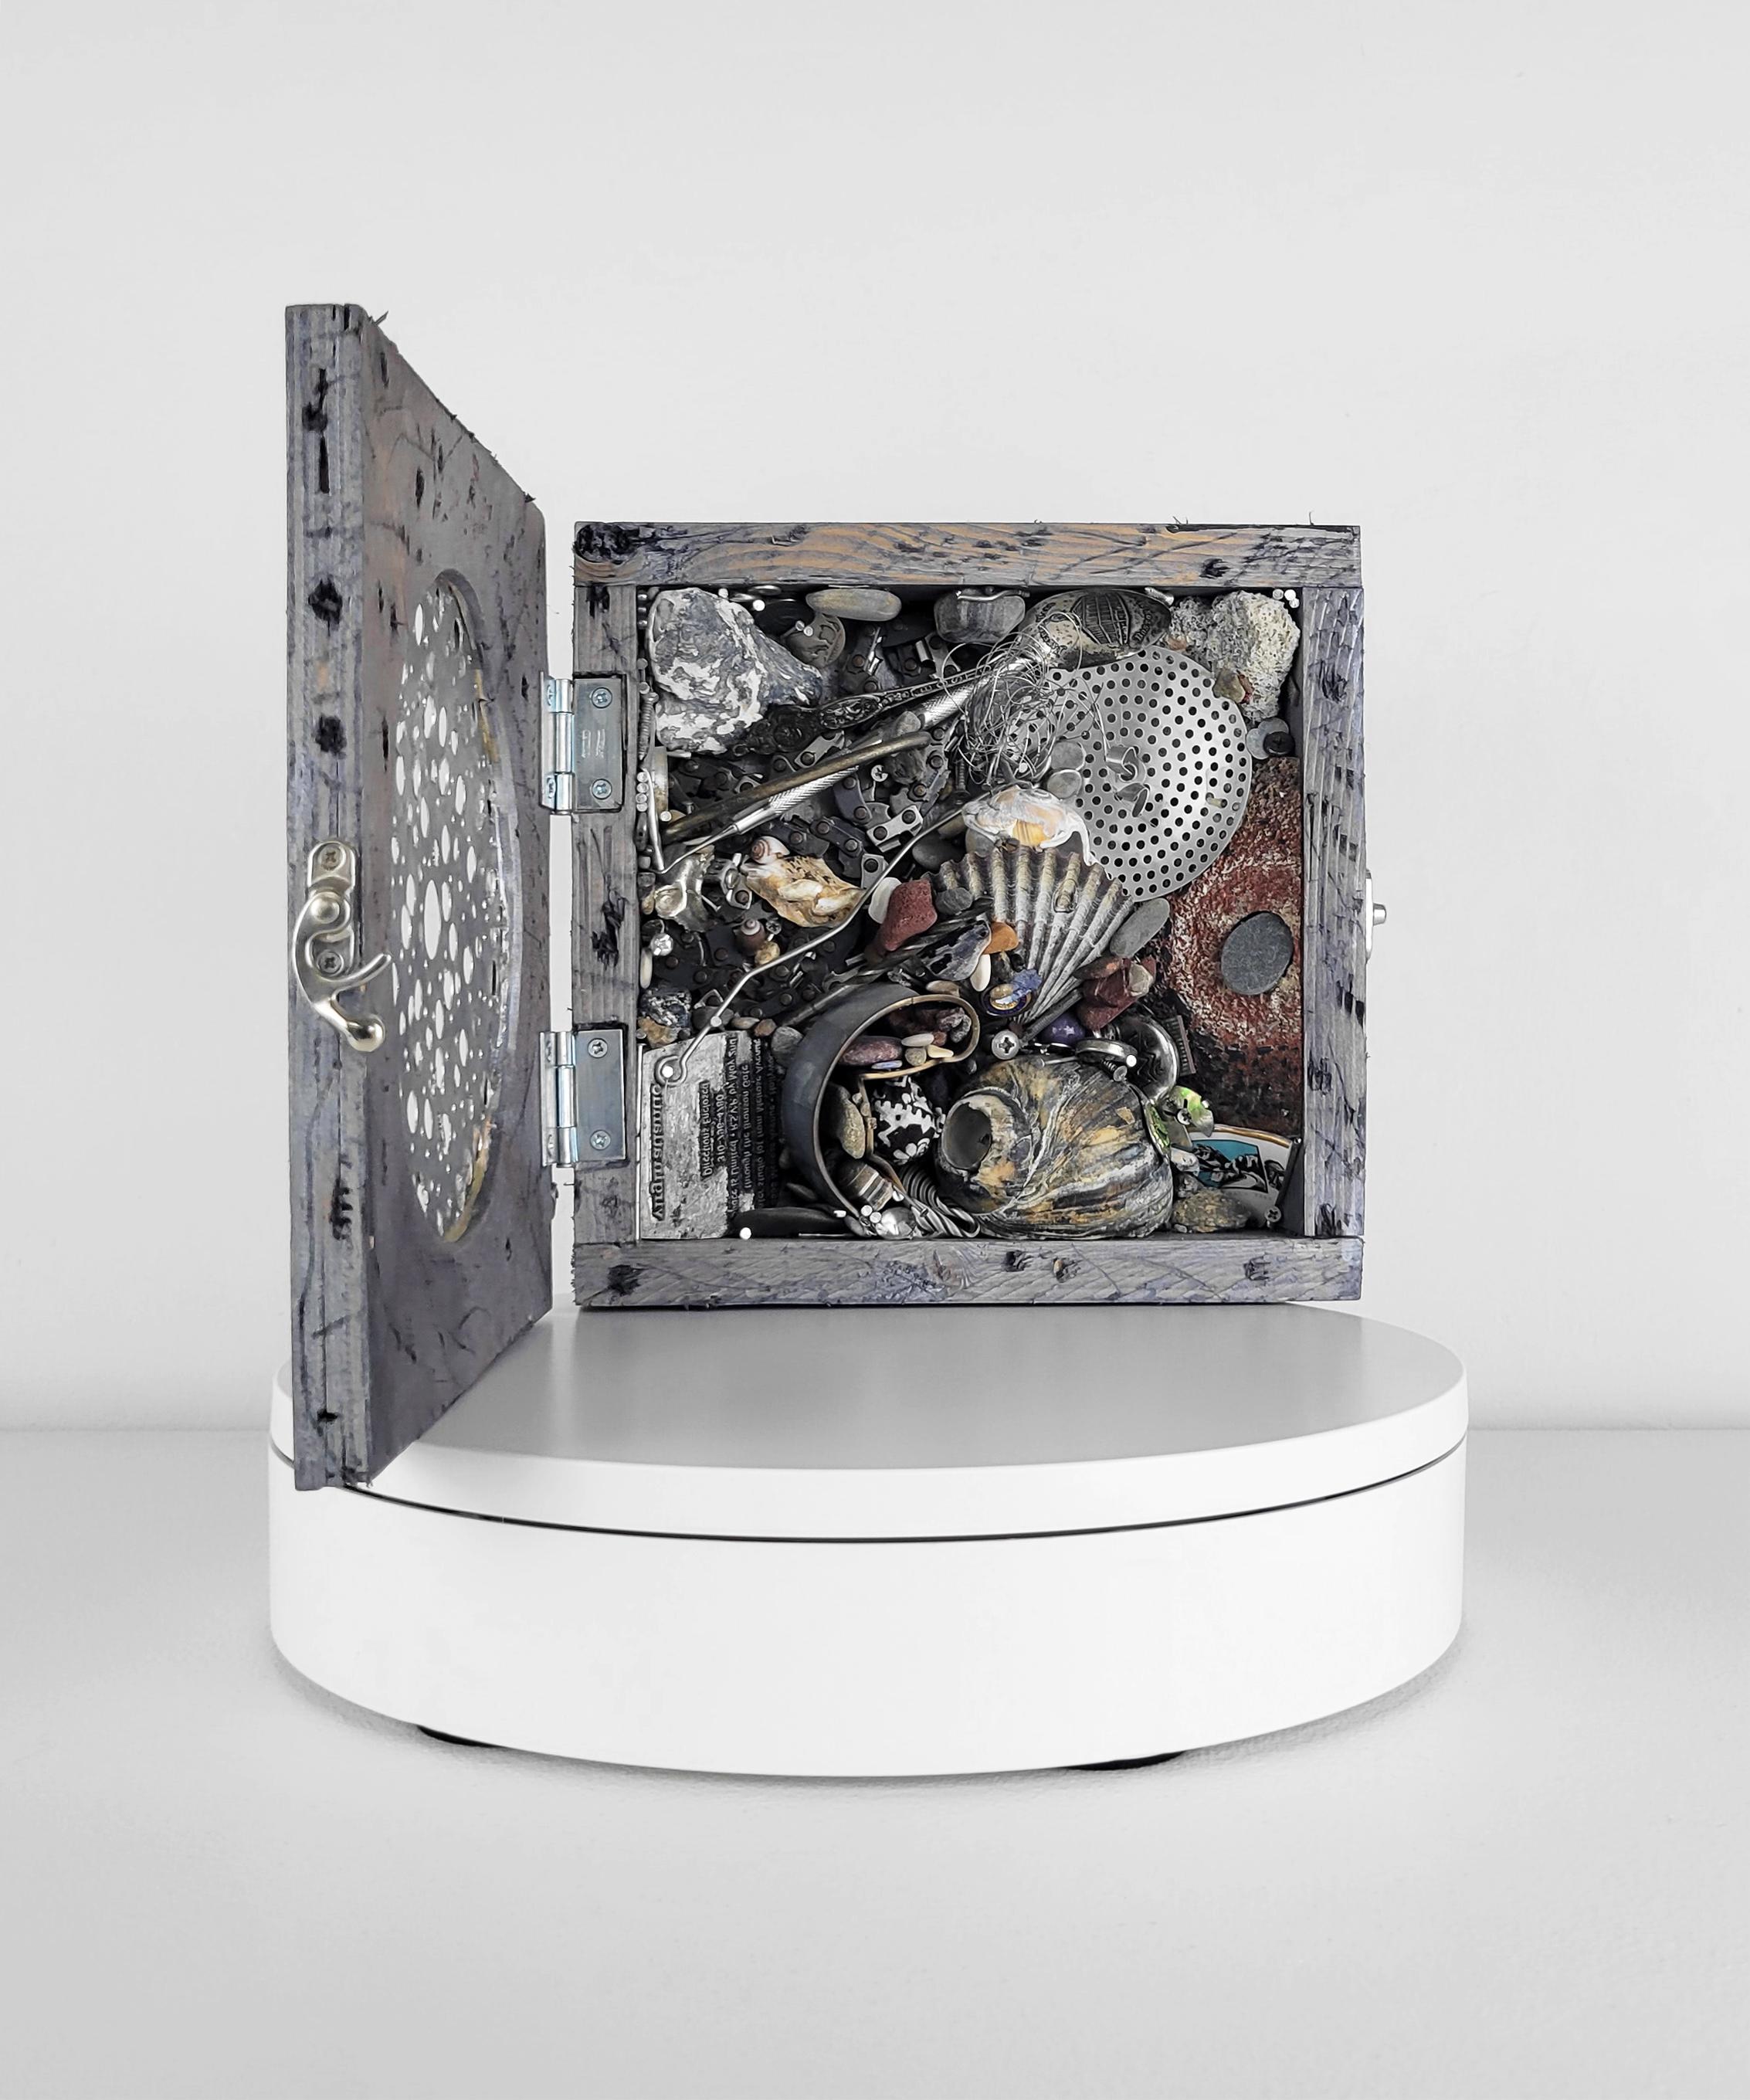 Linda Stein, Case 899 - Contemporary Art Mixed Media Wunderkammer Sculpture

This work from Linda Stein's Displacement From Home series draws from the tradition of wunderkammer/cabinets of curiosities to highlight the global displacement and